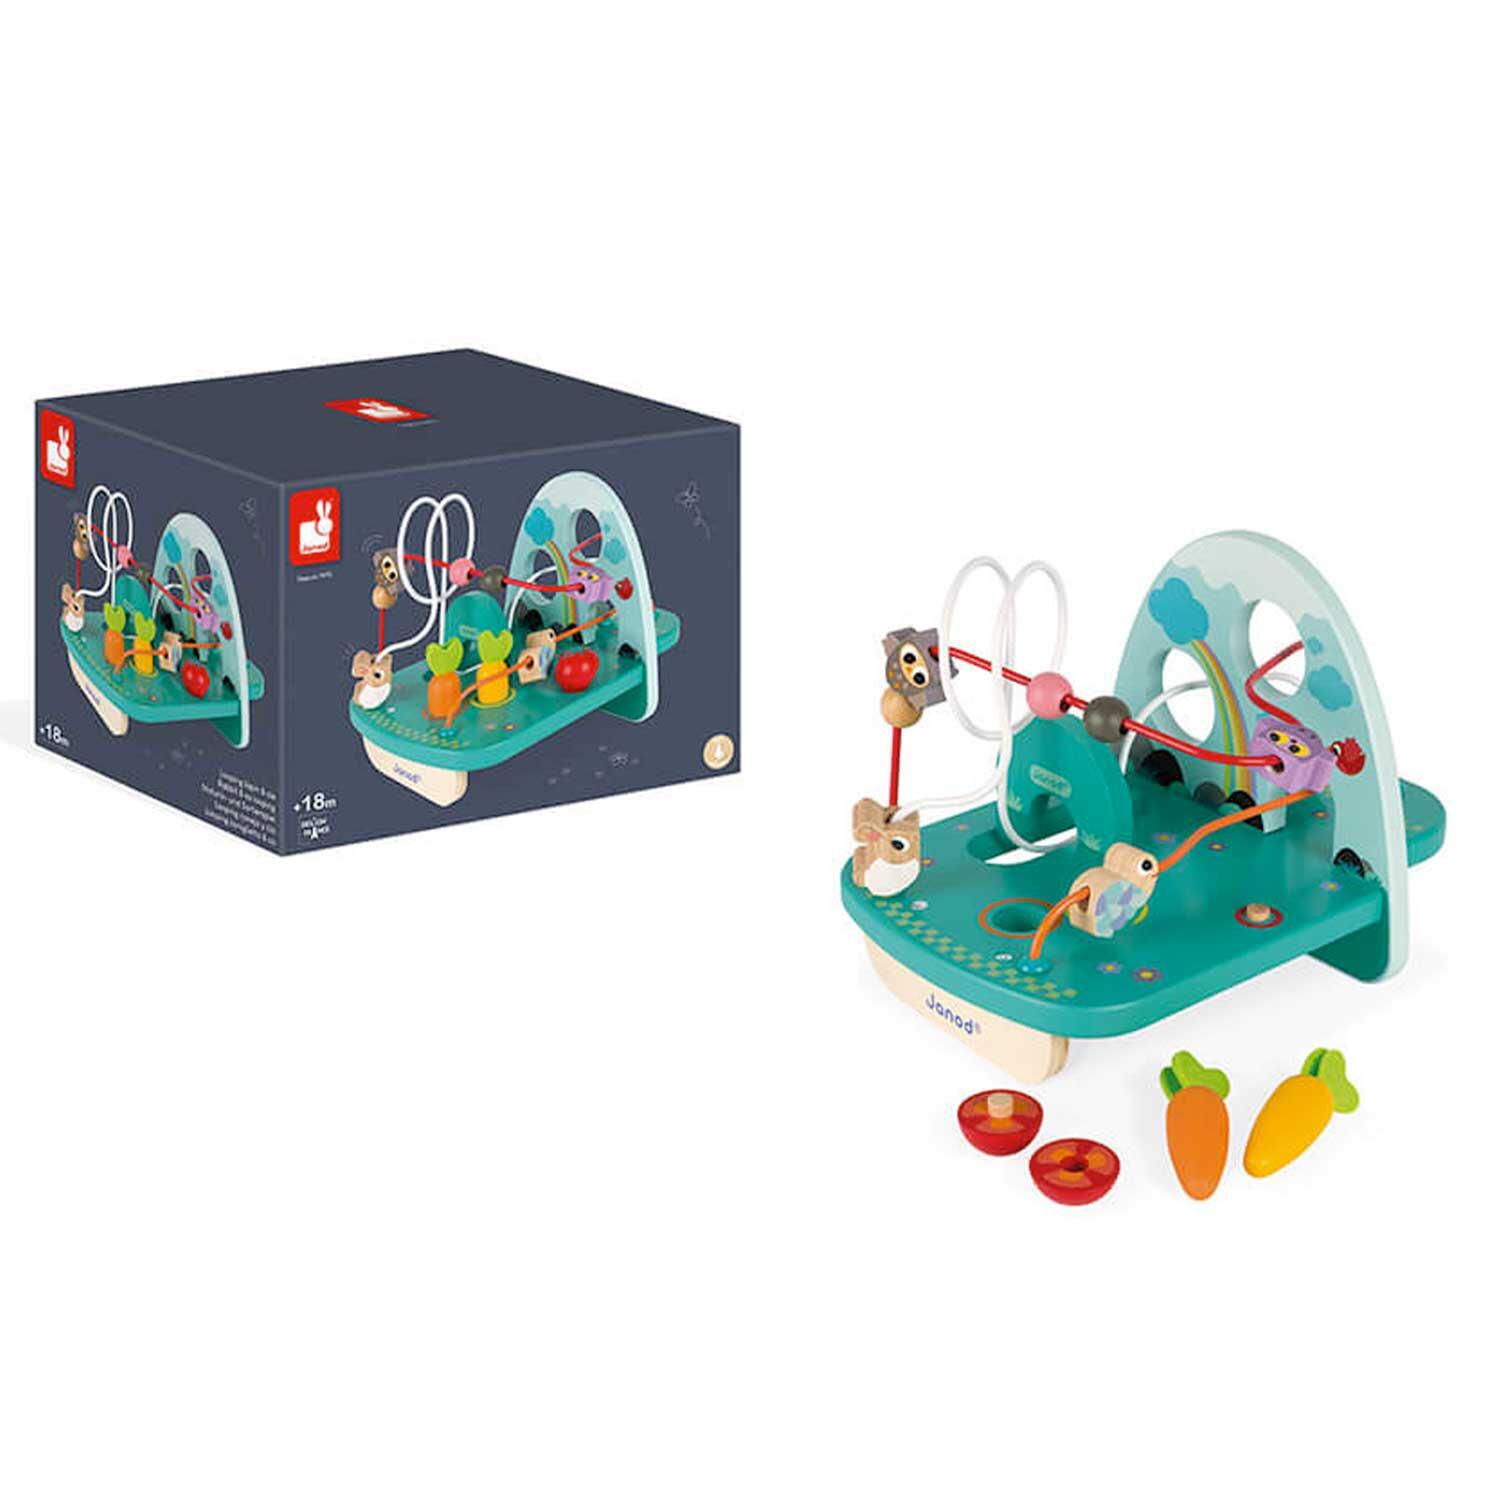 Janod Wooden Rabbit Activity Toy with box